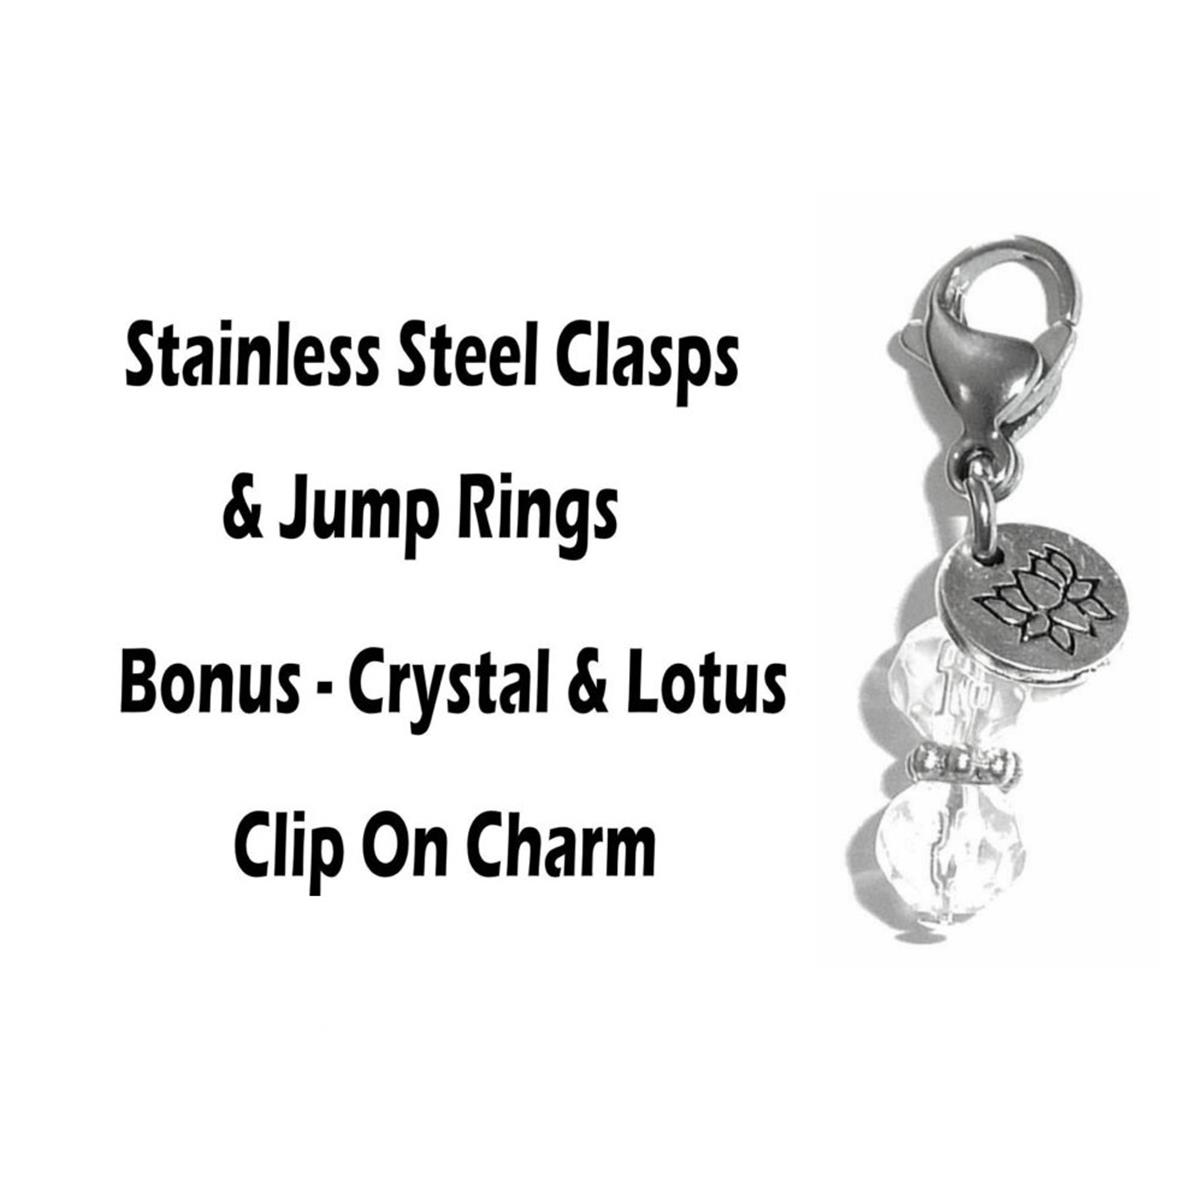 Strong Clip On Charms - Inspirational Charms Clip On Anywhere